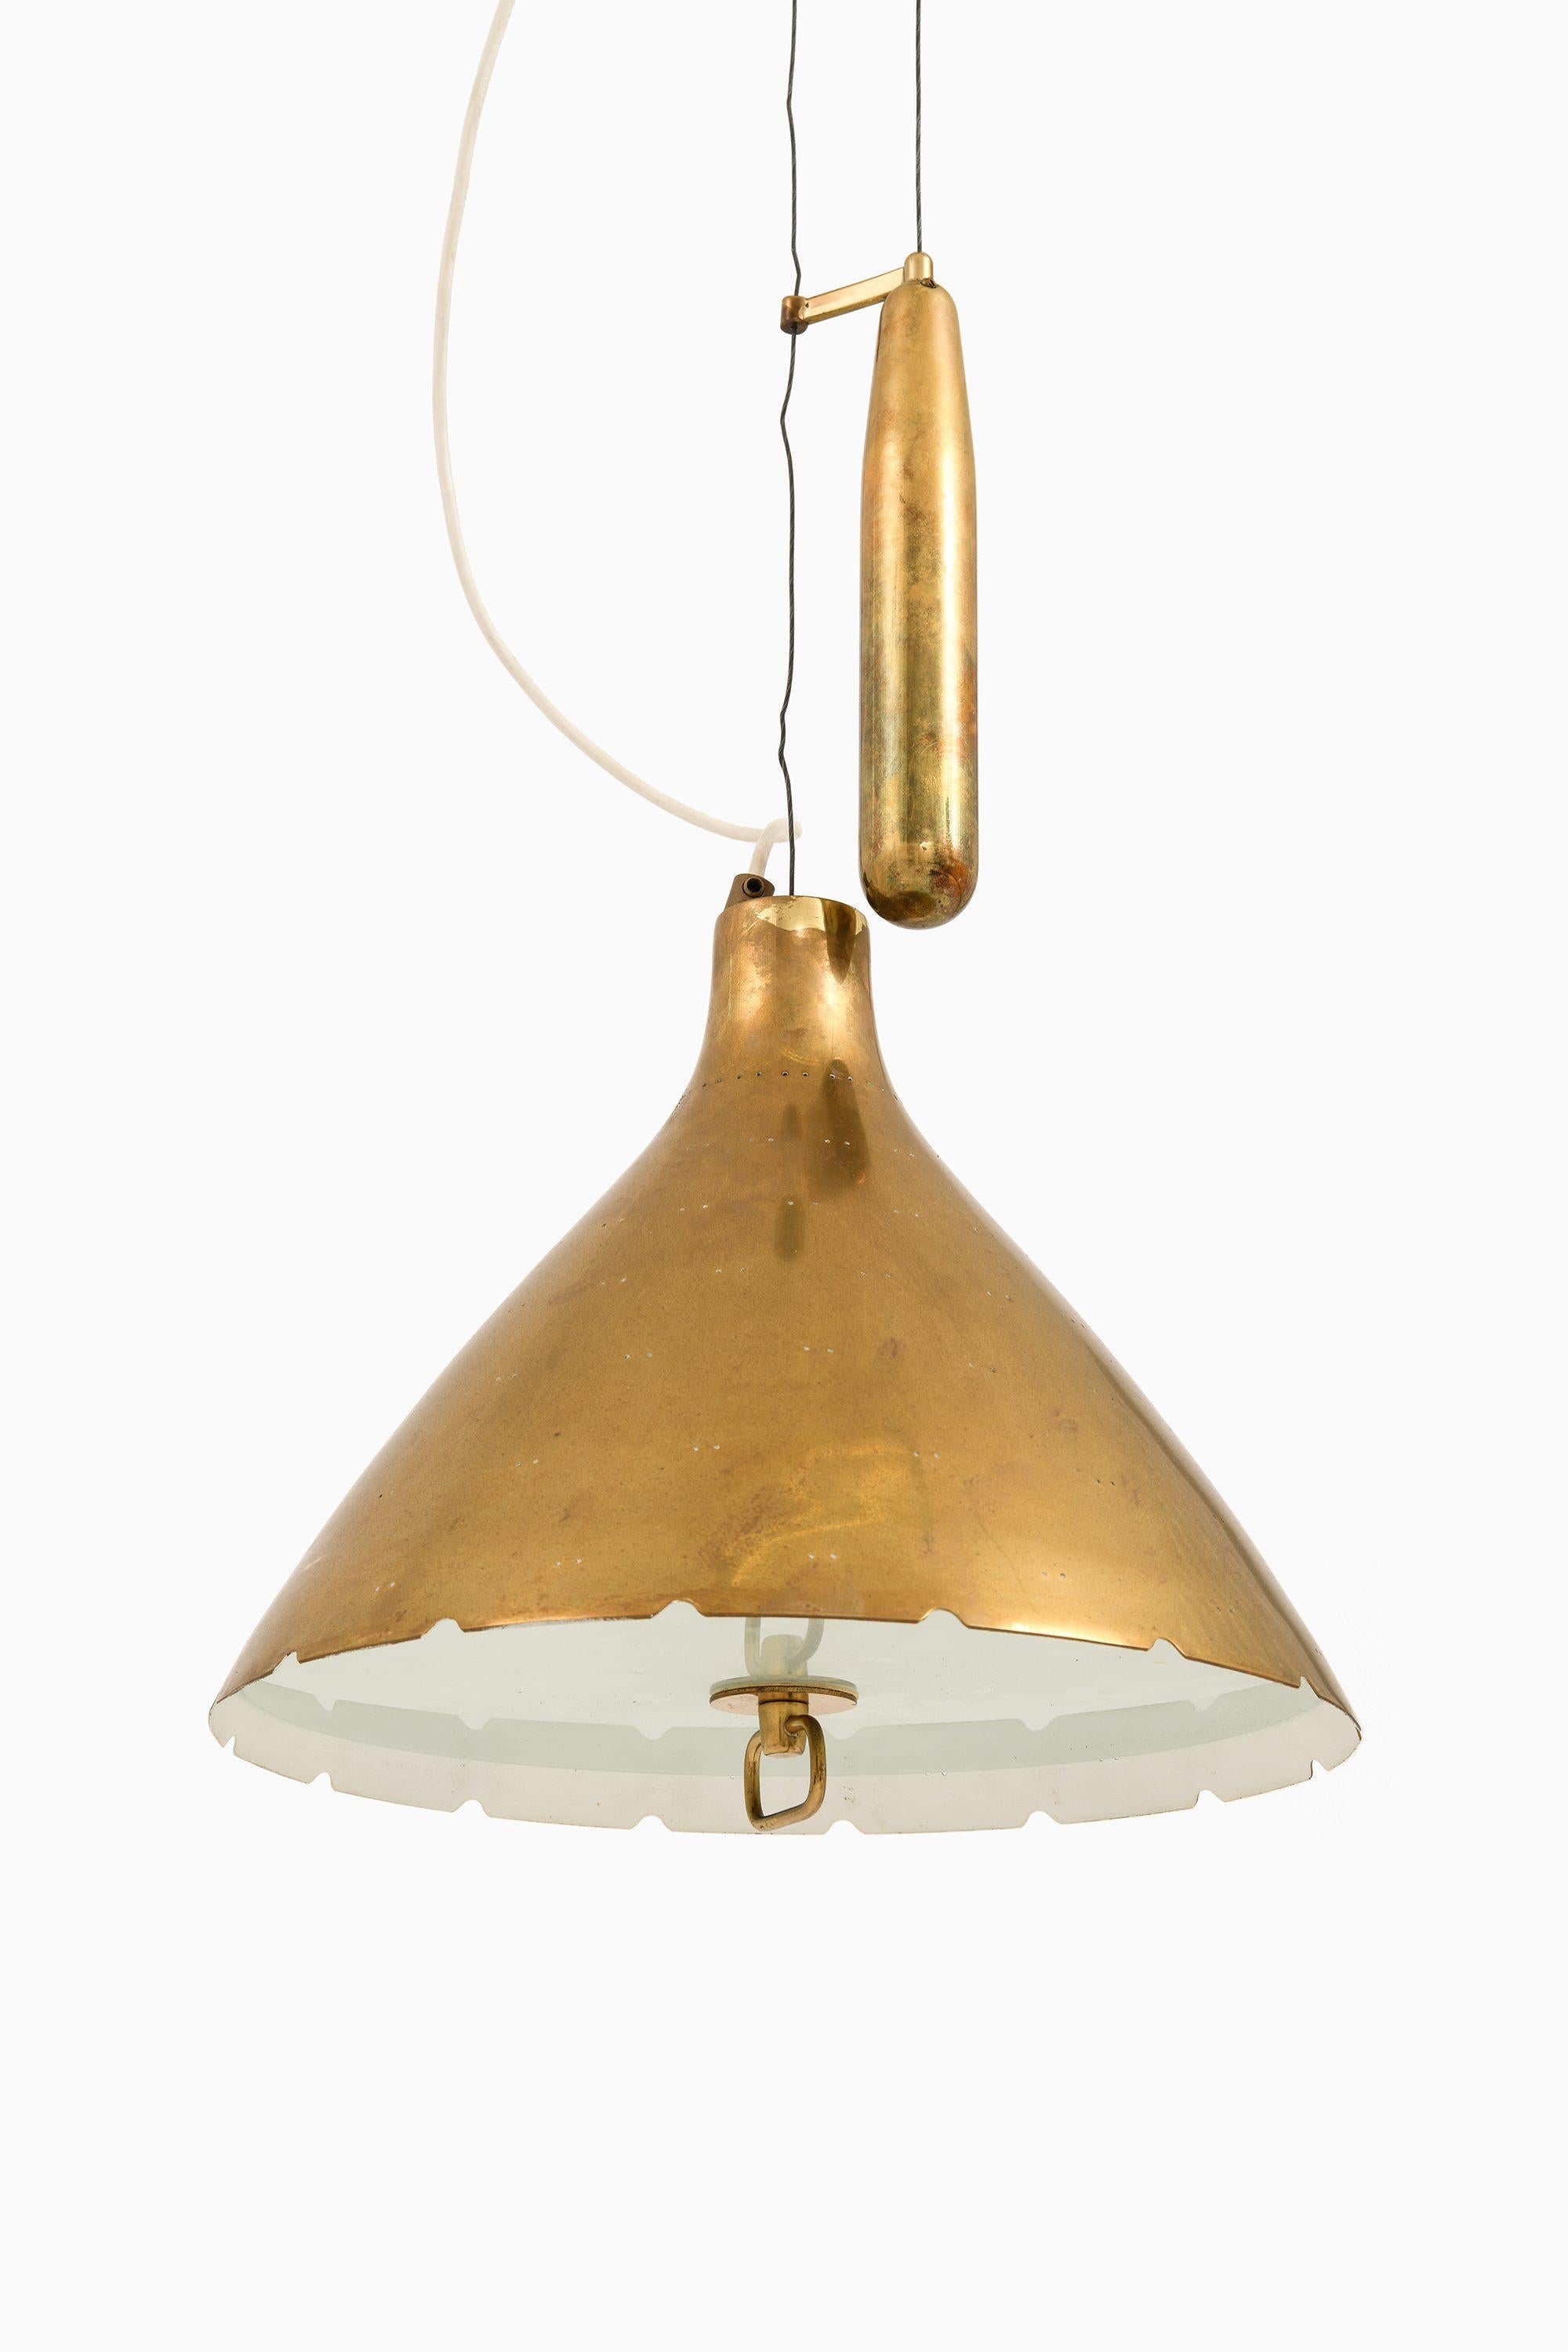 Height Adjustable Ceiling Lamp in Brass and Glass by Paavo Tynell, 1950's

Additional Information:
Material: Brass, glass
Style: Mid century, Scandinavian
Produced by Taito Oy in Finland
Dimensions (W x D x H): 35 x 35 x 120 – 140 cm
Condition: Good